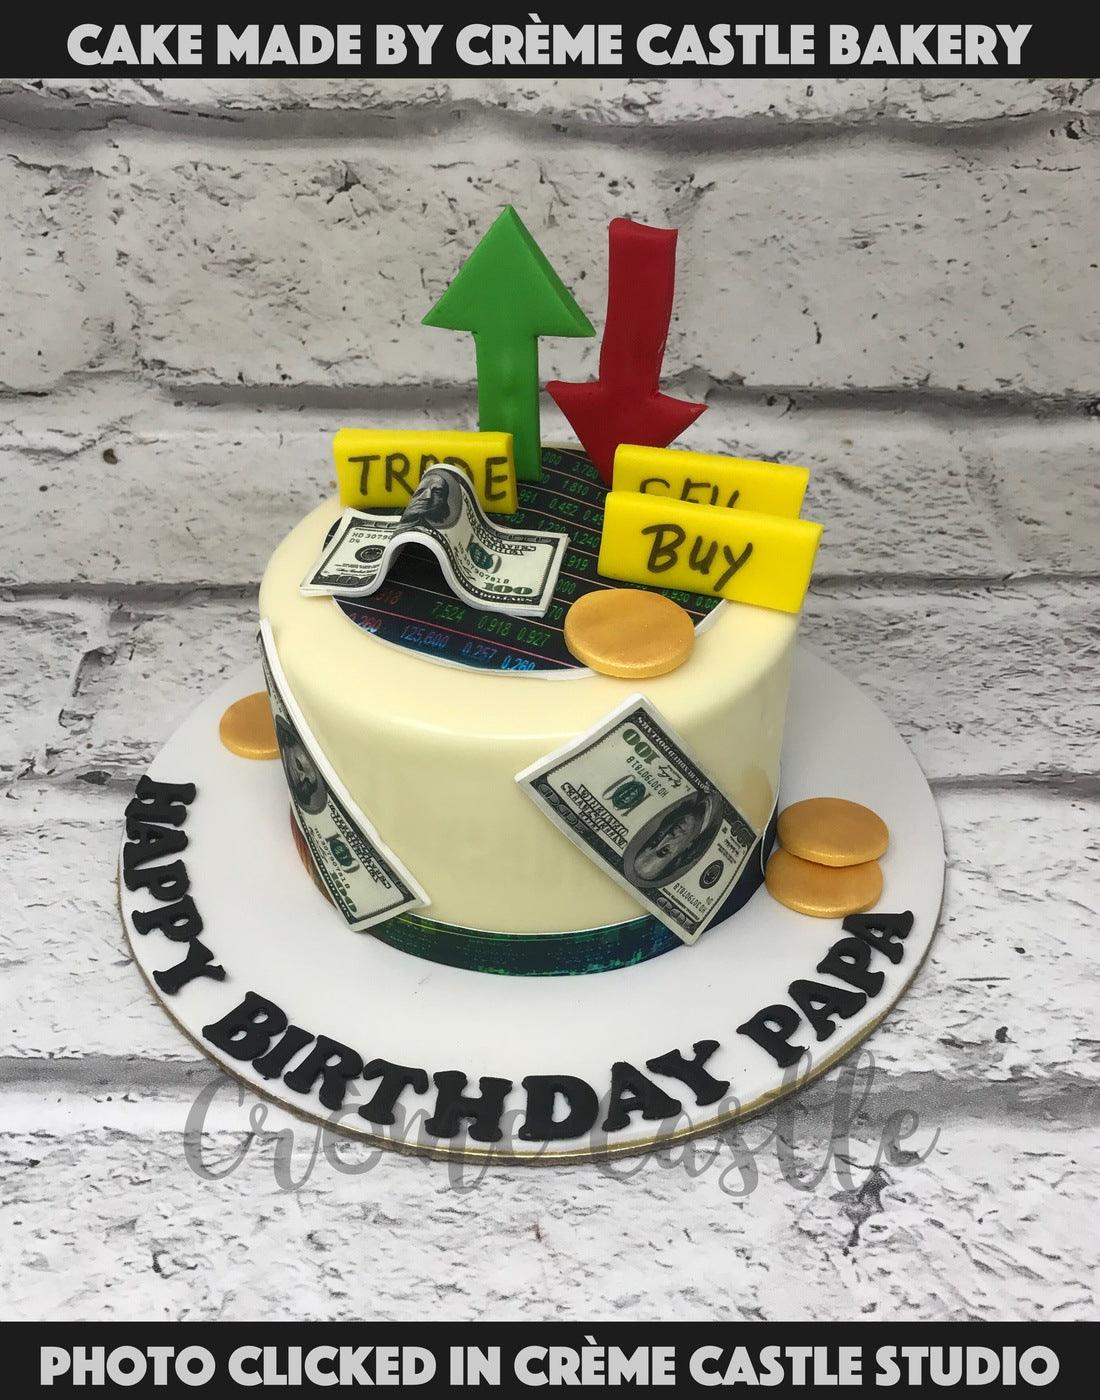 Stock Market Theme Cake with Money by Creme Castle